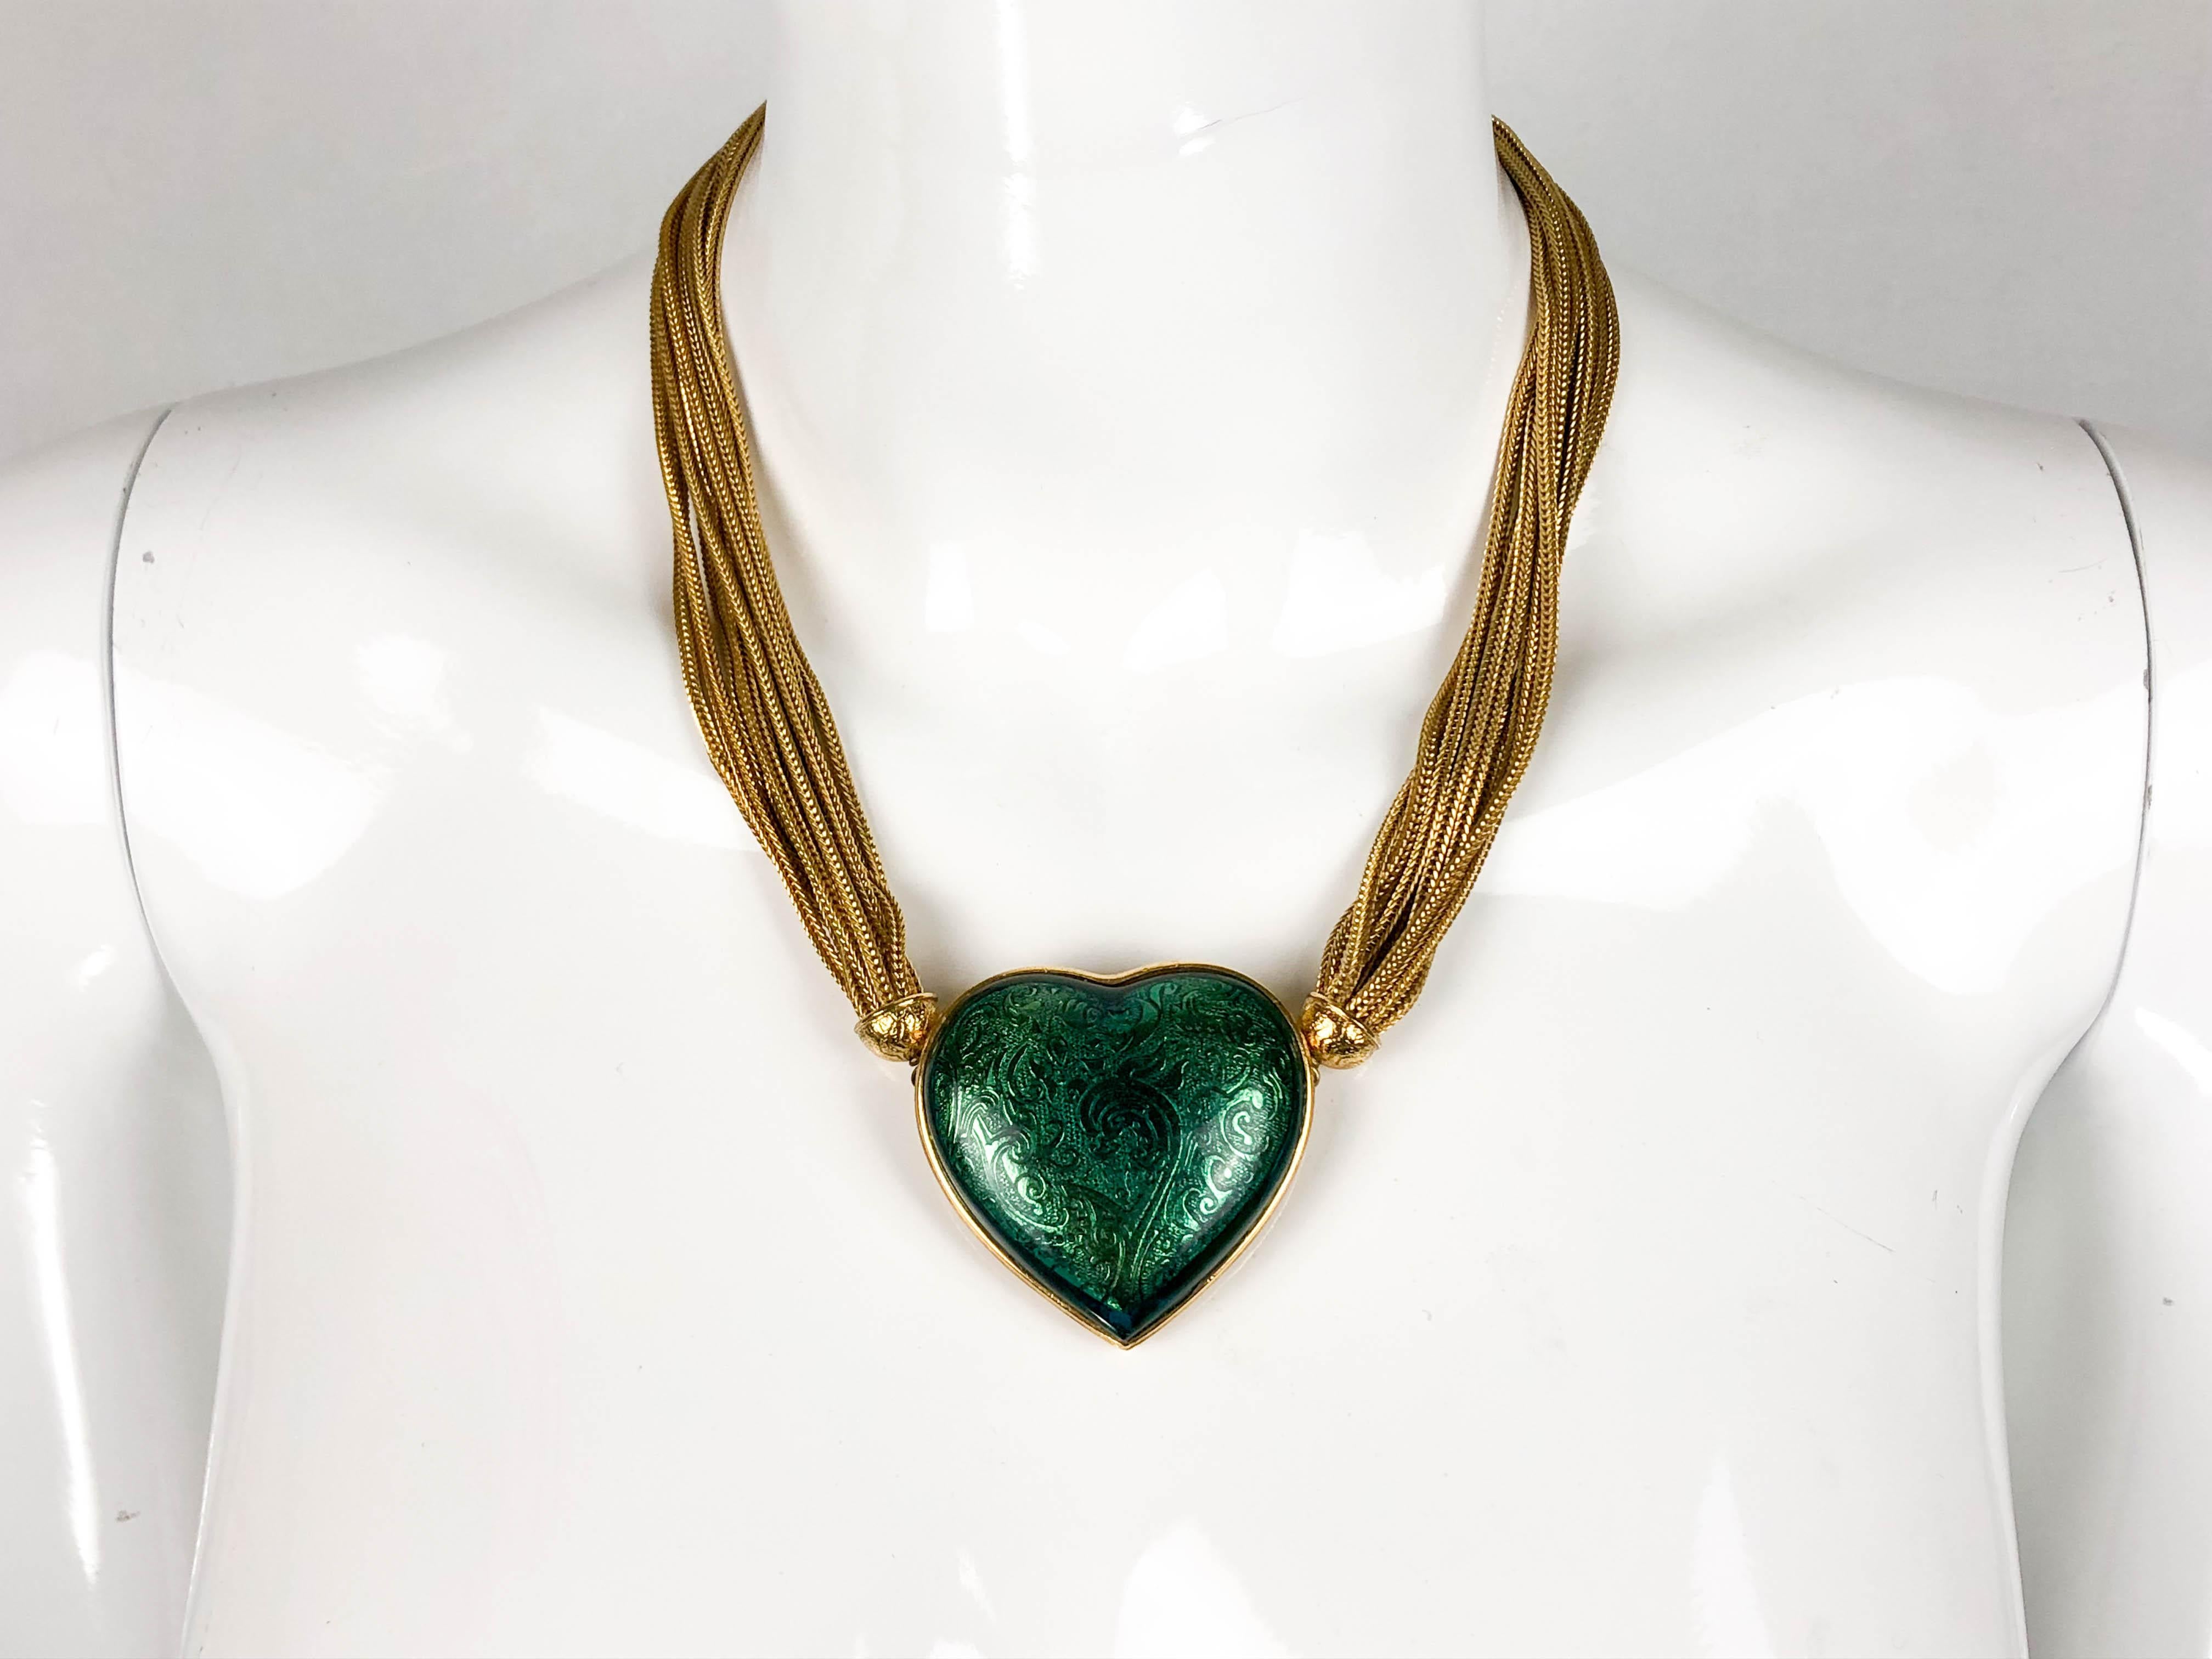 Vintage Yves Saint Laurent Gilt Chain Green Heart Pendant Necklace. This gorgeous piece by Yves Saint Laurent dates back from the 1980’s. Multiple chains are put together as tassels with no open end. Right in the middle, there is an emerald-green